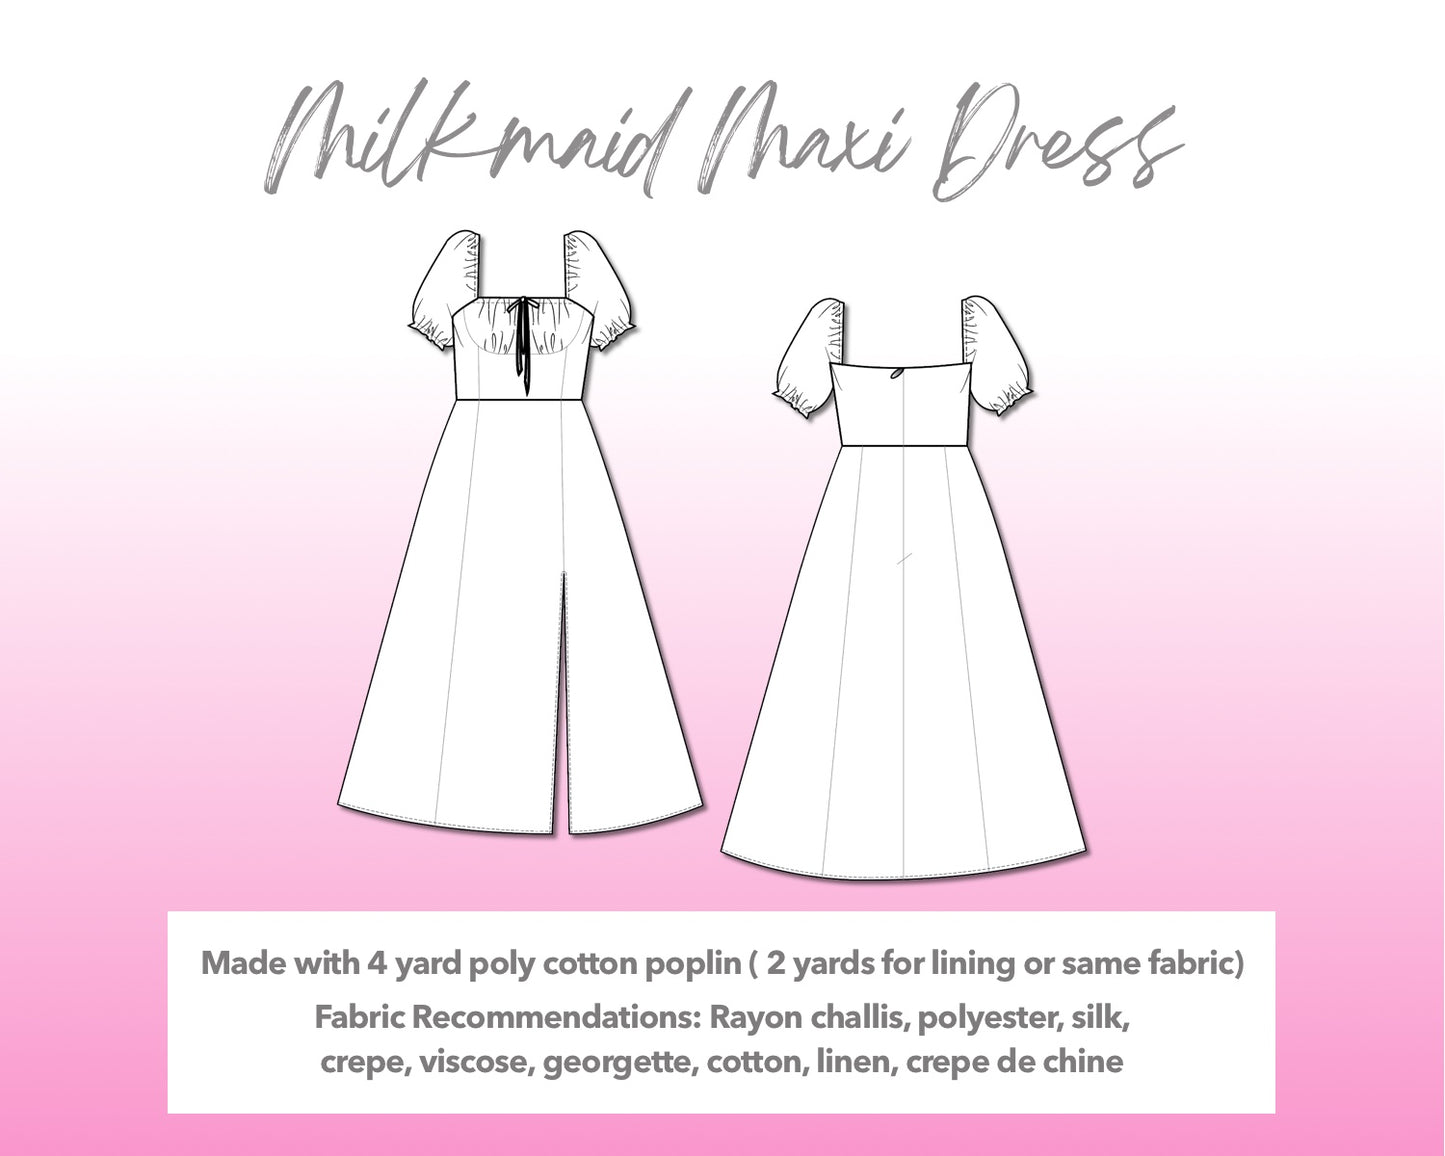 Illustration and detailed description for Milkmaid Maxi Dress sewing pattern.